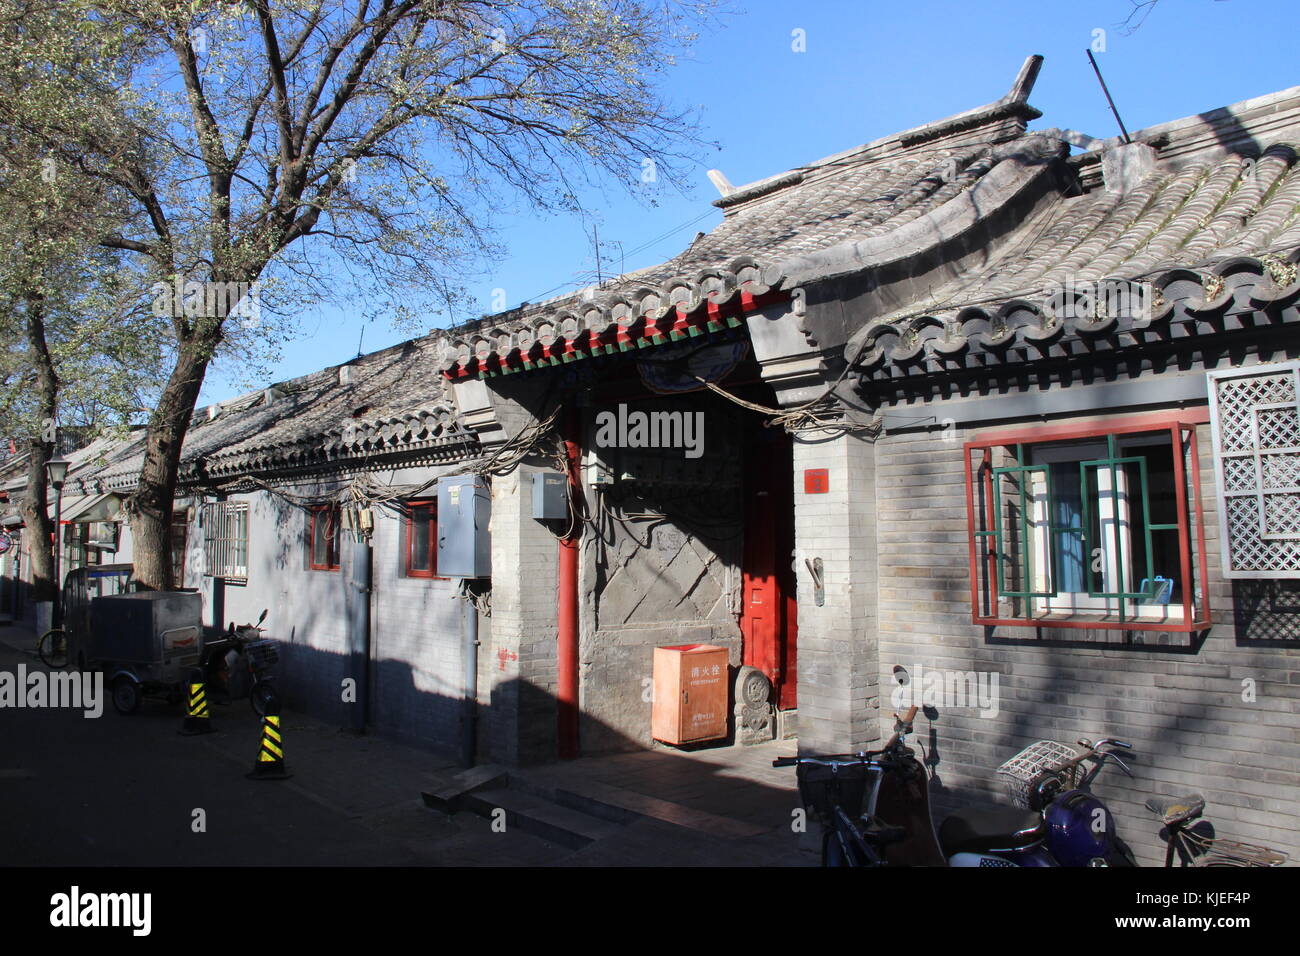 Traditional Chinese alleys, dwellings and shops - Beijing, China Stock Photo